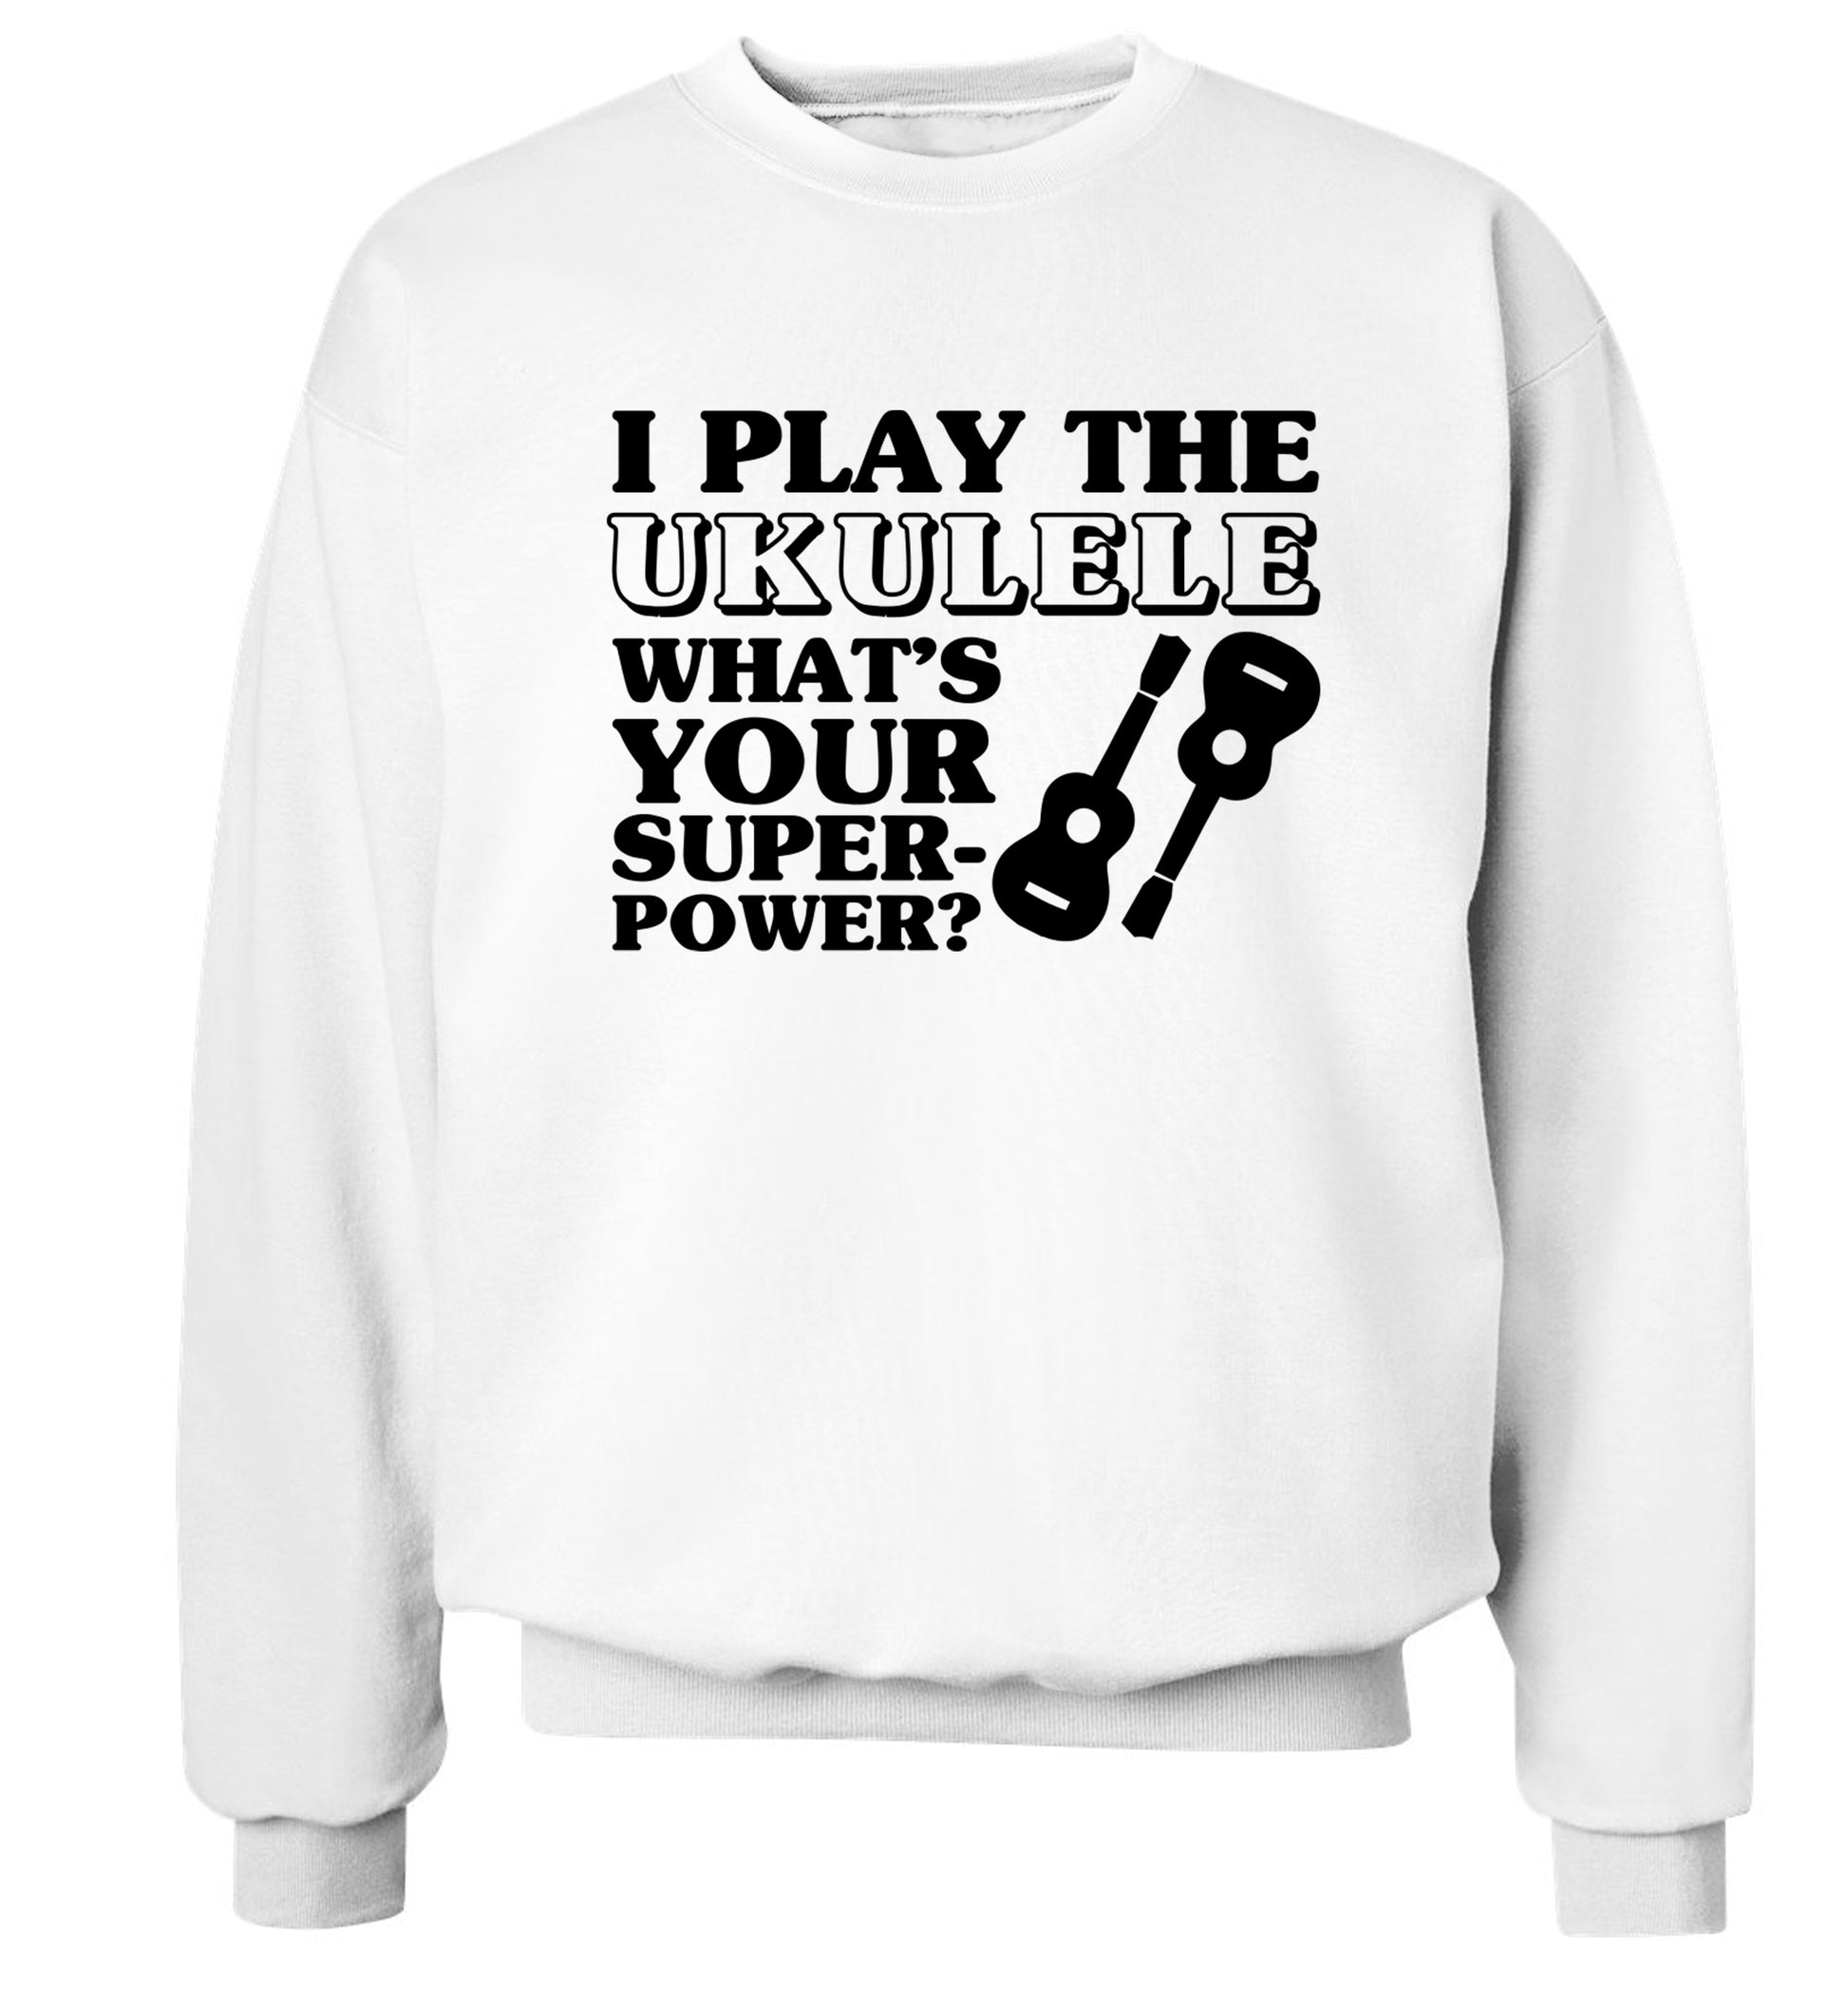 I play the ukulele what's your superpower? Adult's unisex white Sweater 2XL